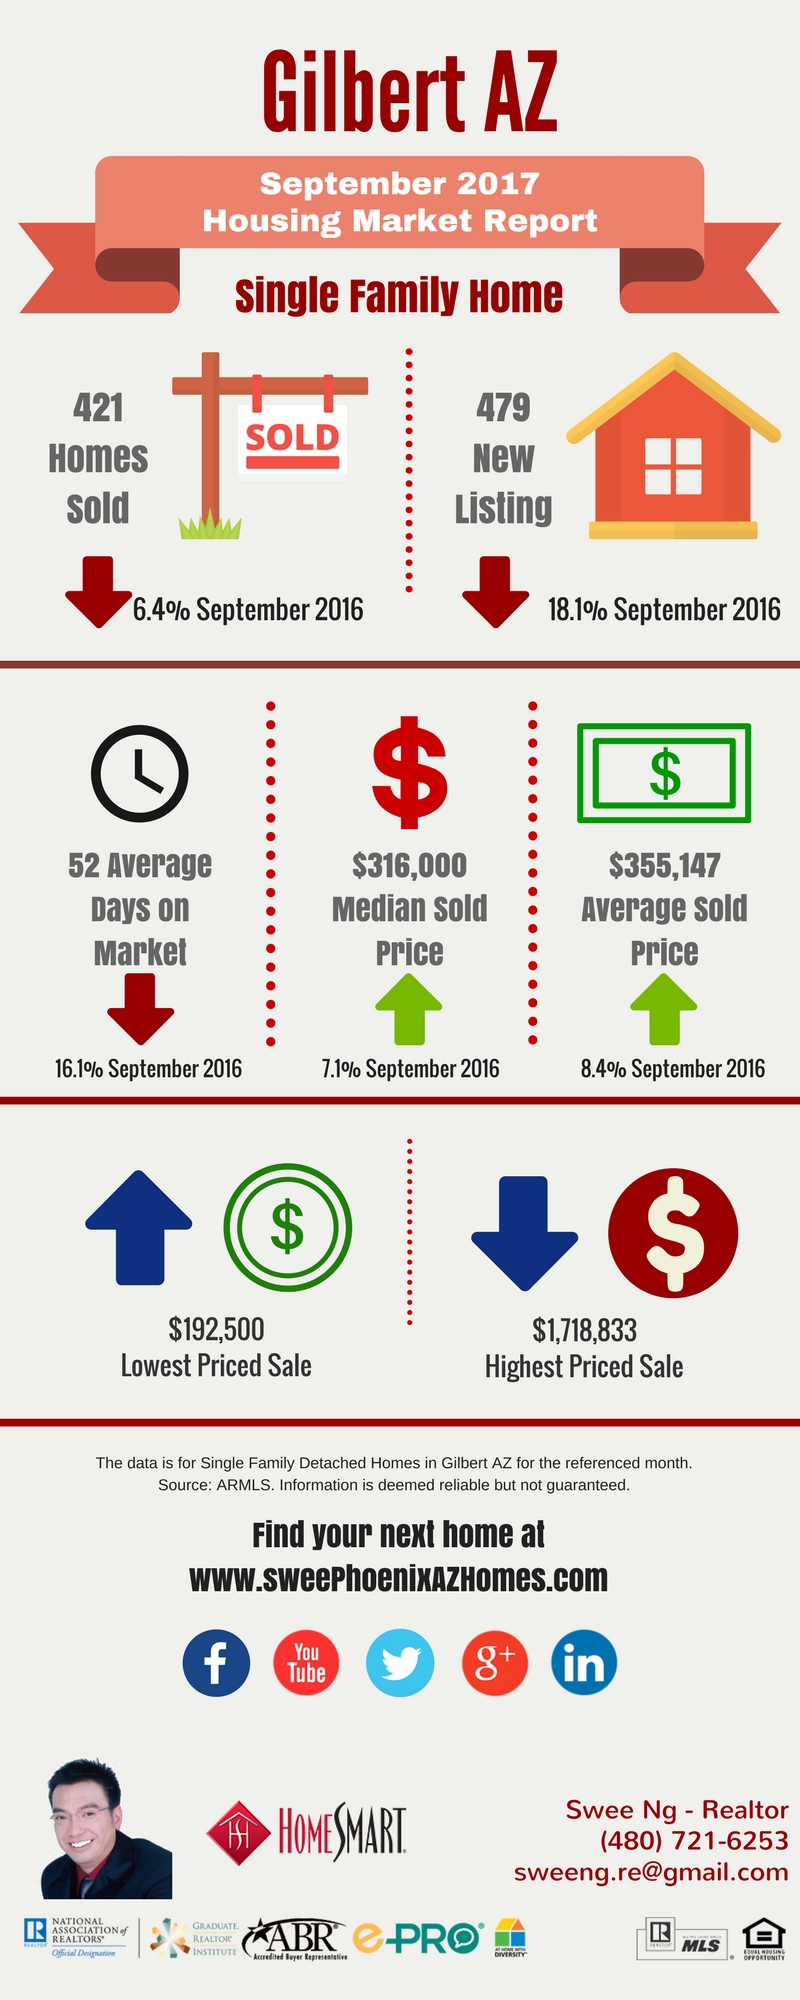 Gilbert AZ Housing Market Trends Report September 2017 by Swee Ng, Real Estate and House Value